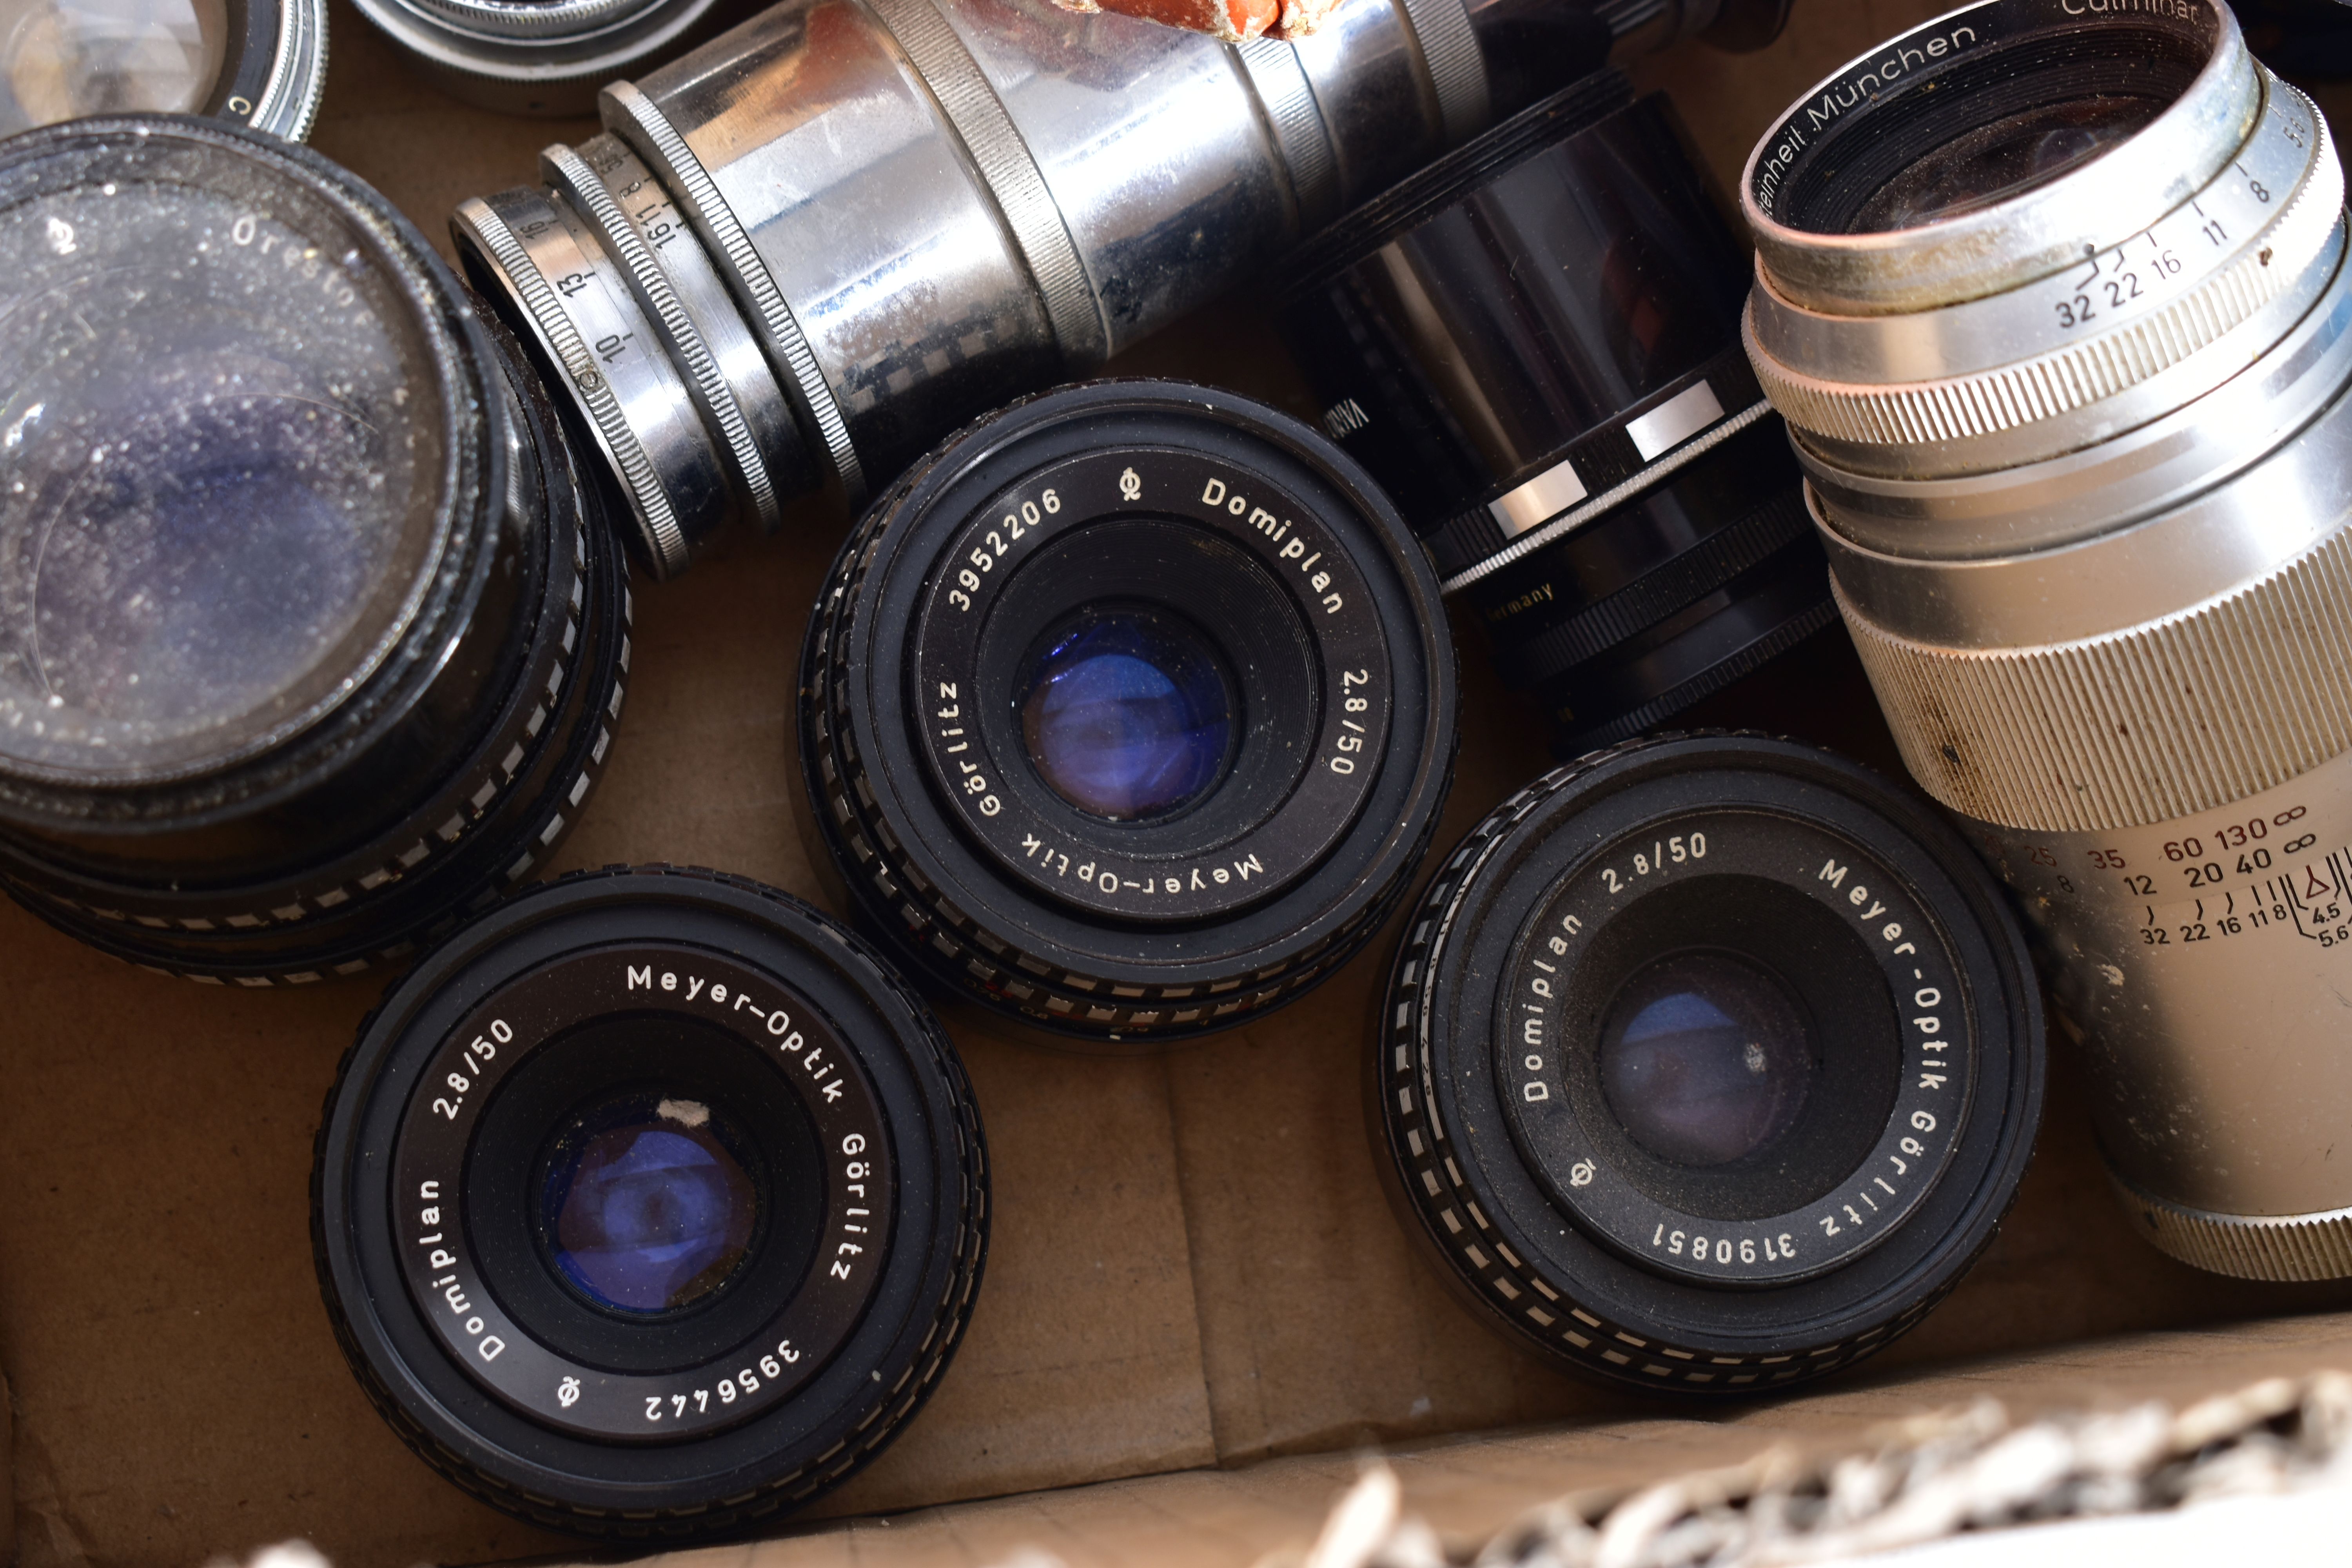 A SMALL TRAY CONTAINING CAMERA LENSES by makers such as Schneider-Kreuznach, Meyer Optic, Carl Zeiss - Image 4 of 4